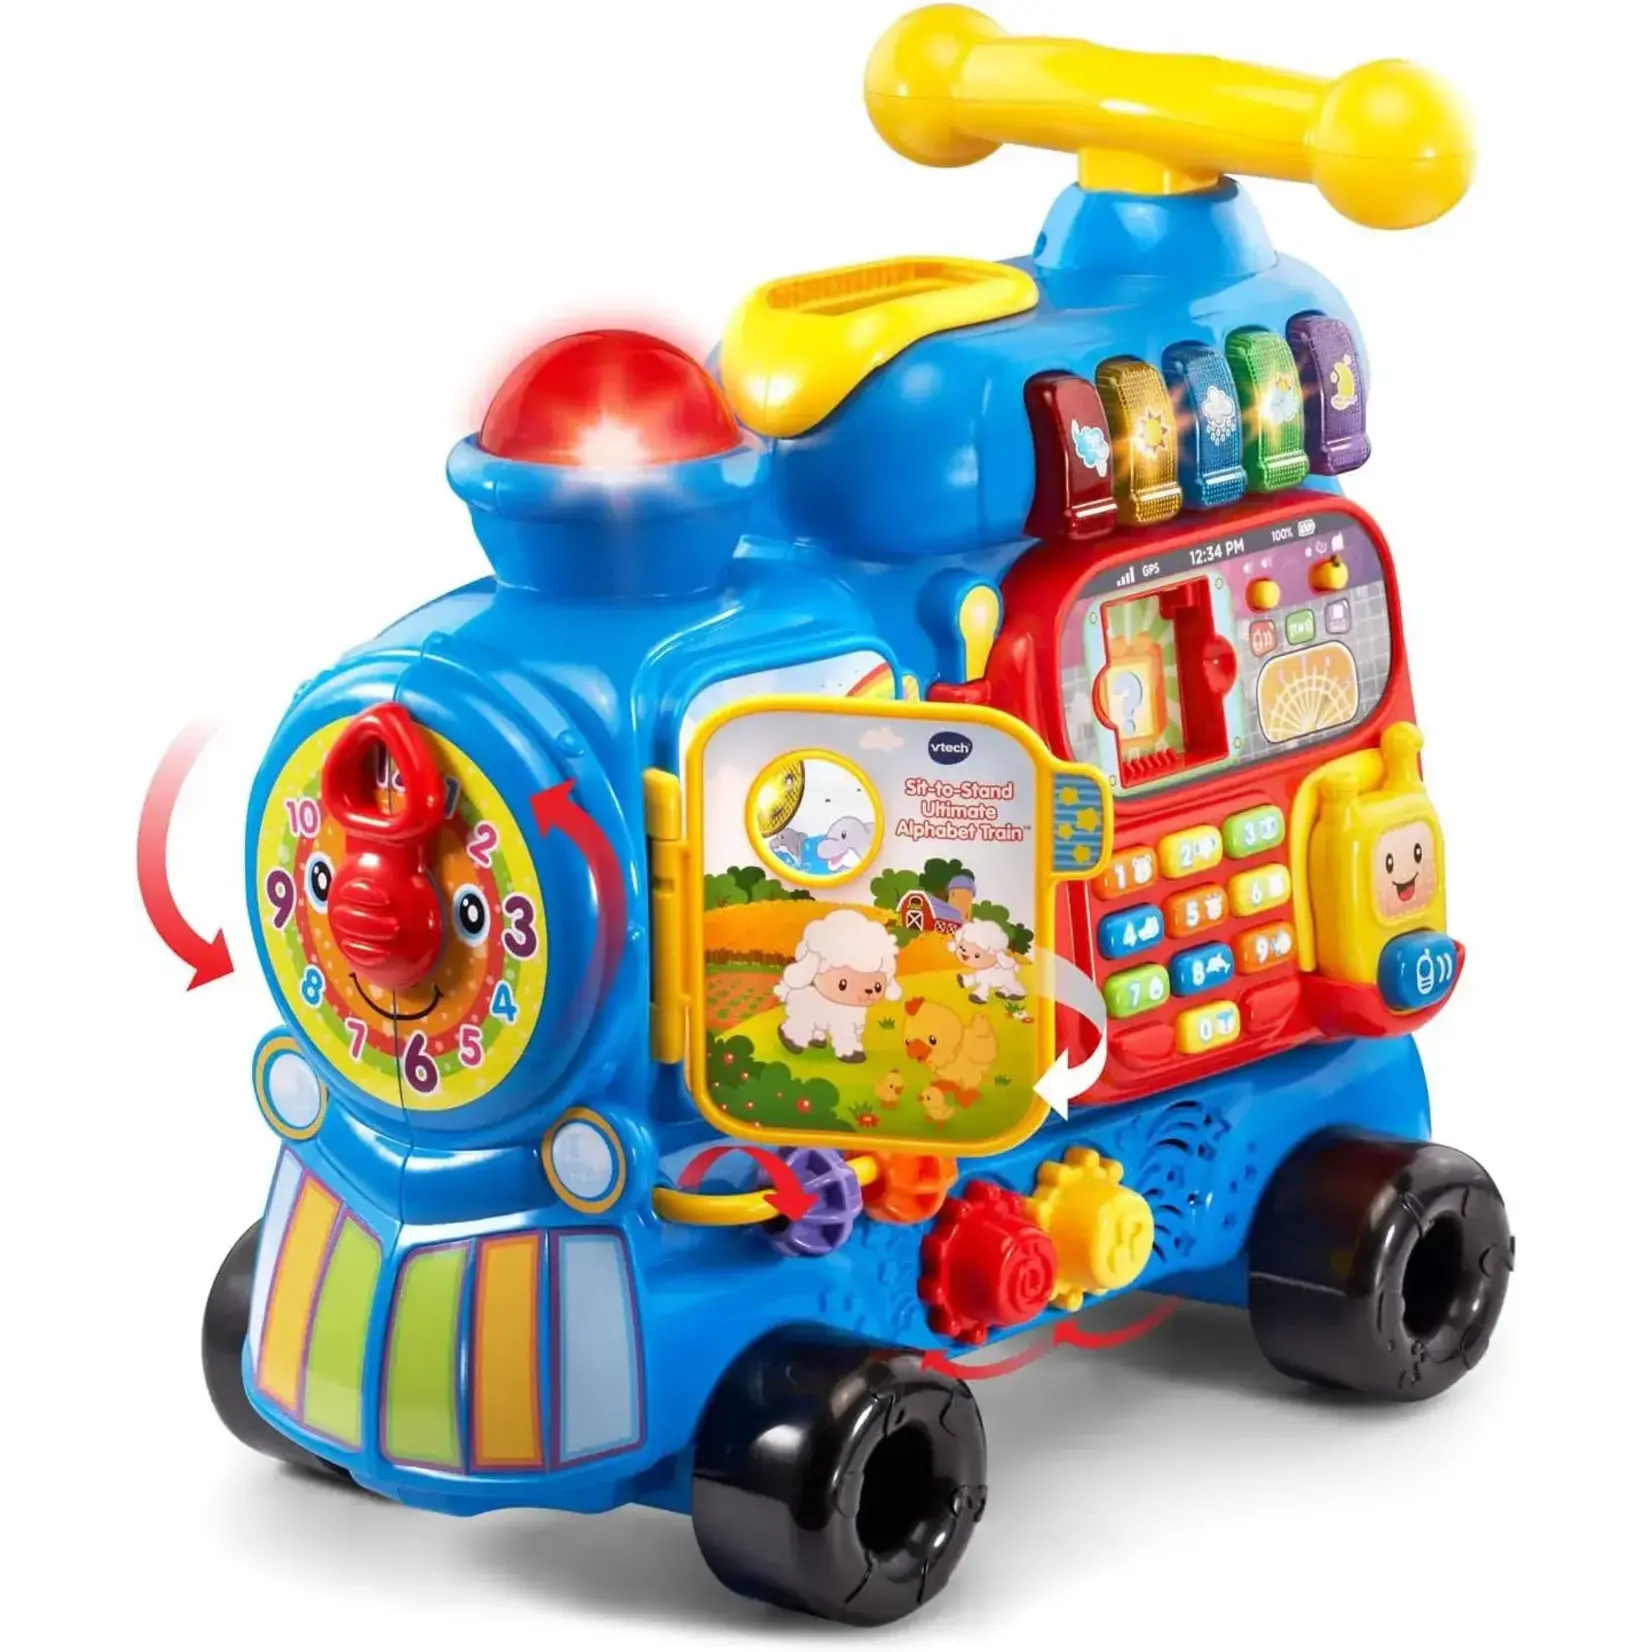 VTech Sit To Stand Musical Train, Good Working Order for Sale in